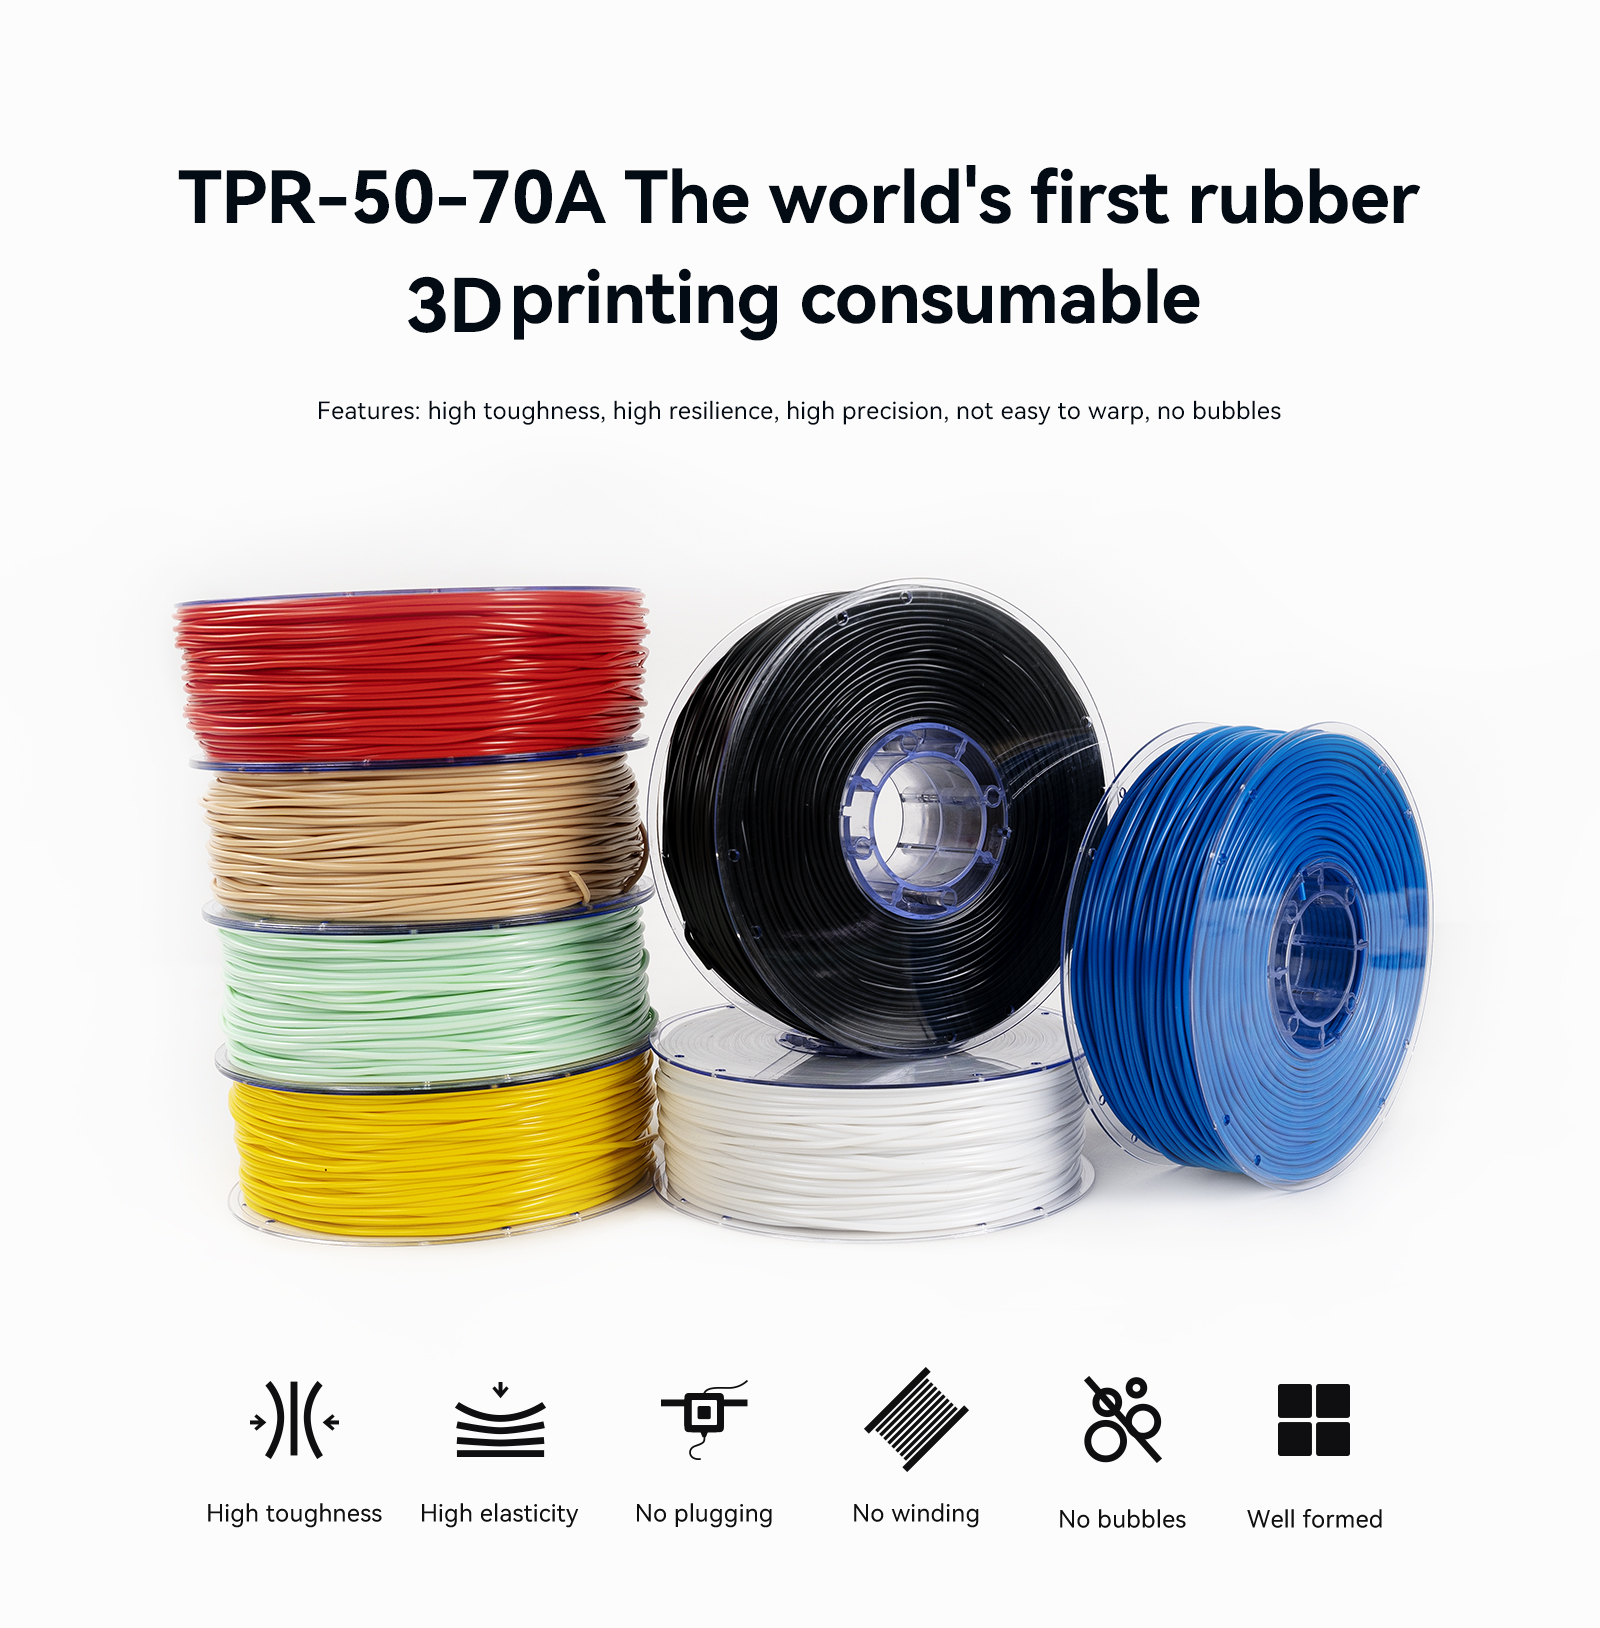 ATOMSTACK-TPR-Hermoplastic-Rubber-Material-3D-Printing-Material-fits-Cambrian-Pro-3D-Printer-1871197-1